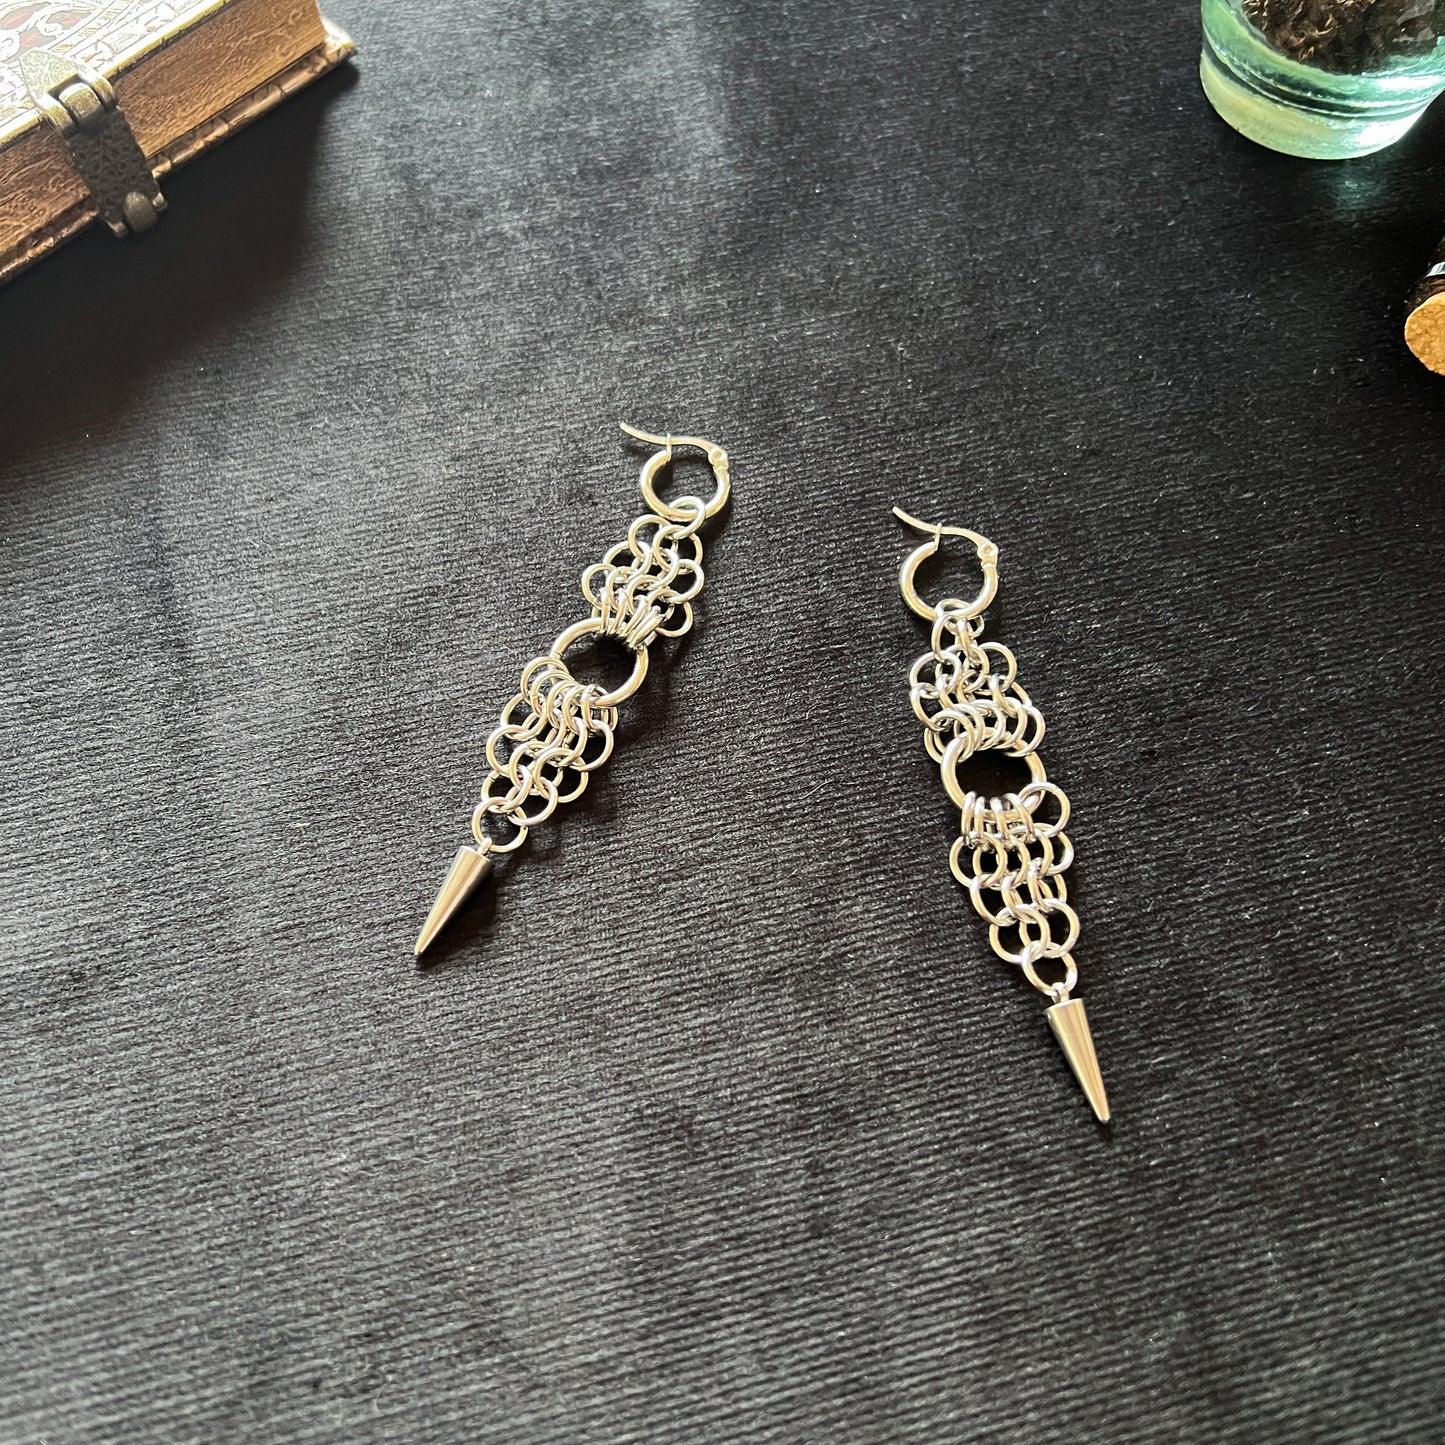 medieval fantasy gothic chainmail earrings